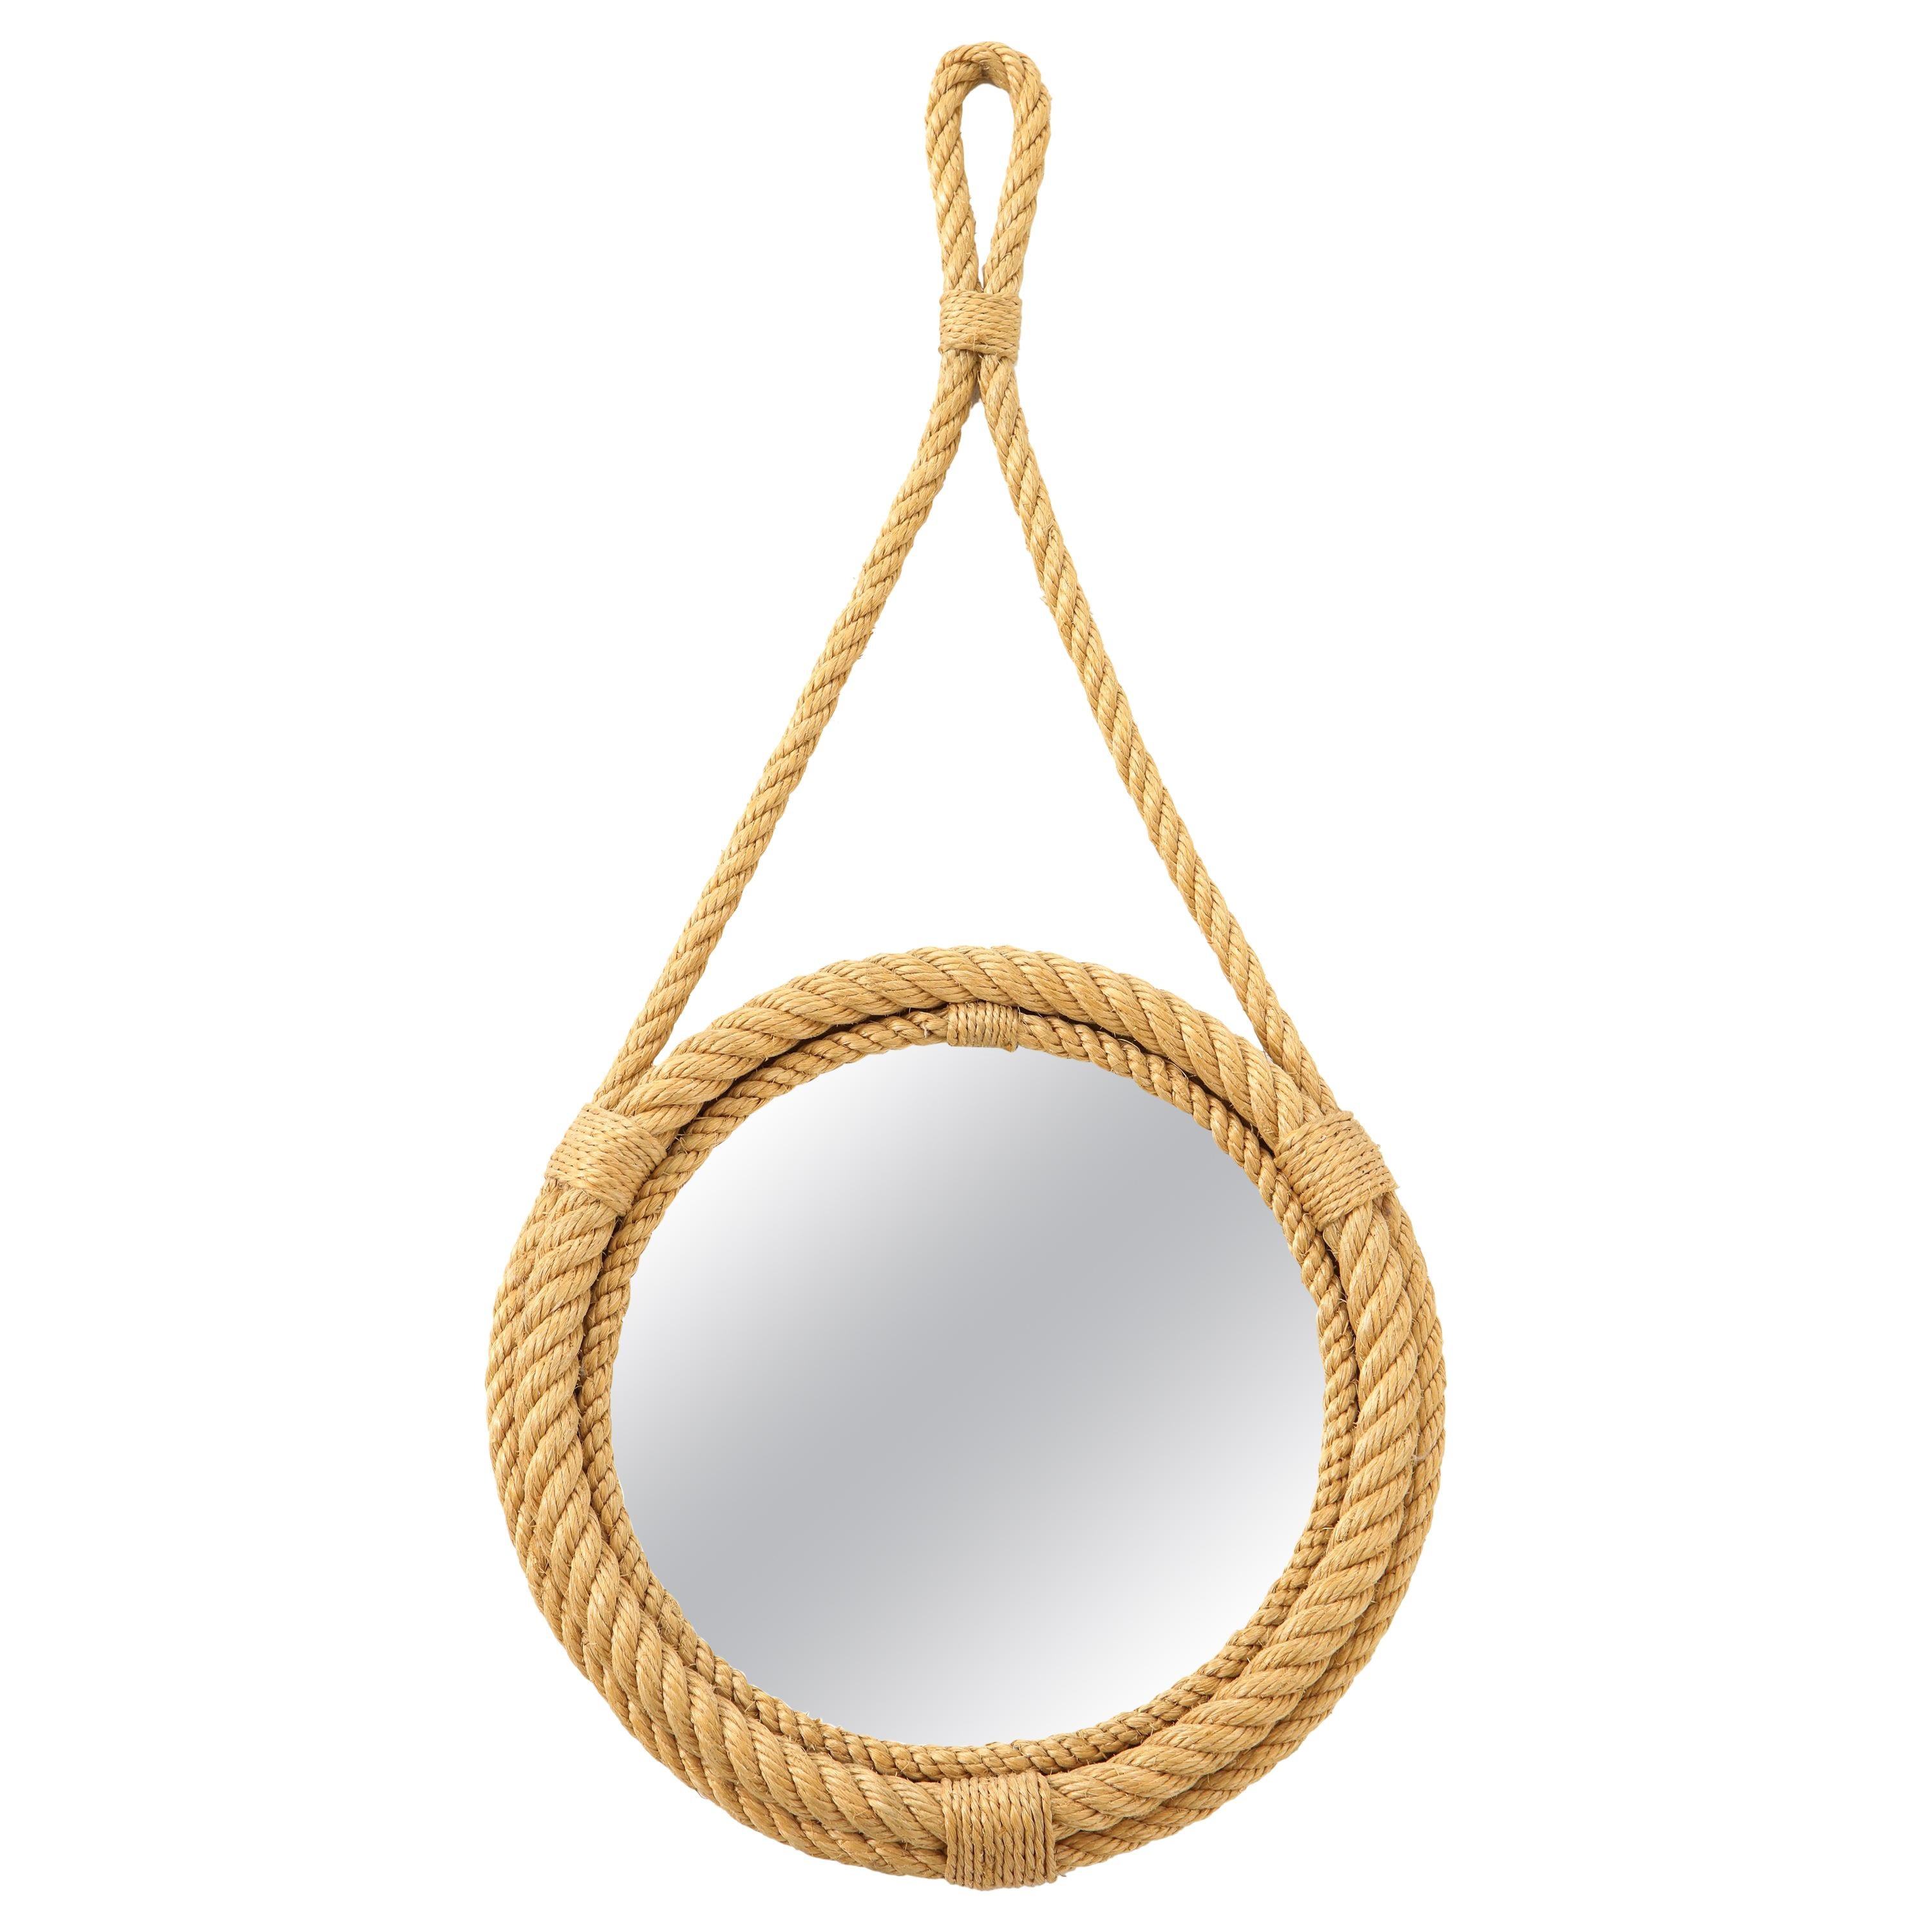 Petite Wall Rope Mirror by Audoux Minnet, France, 1960s